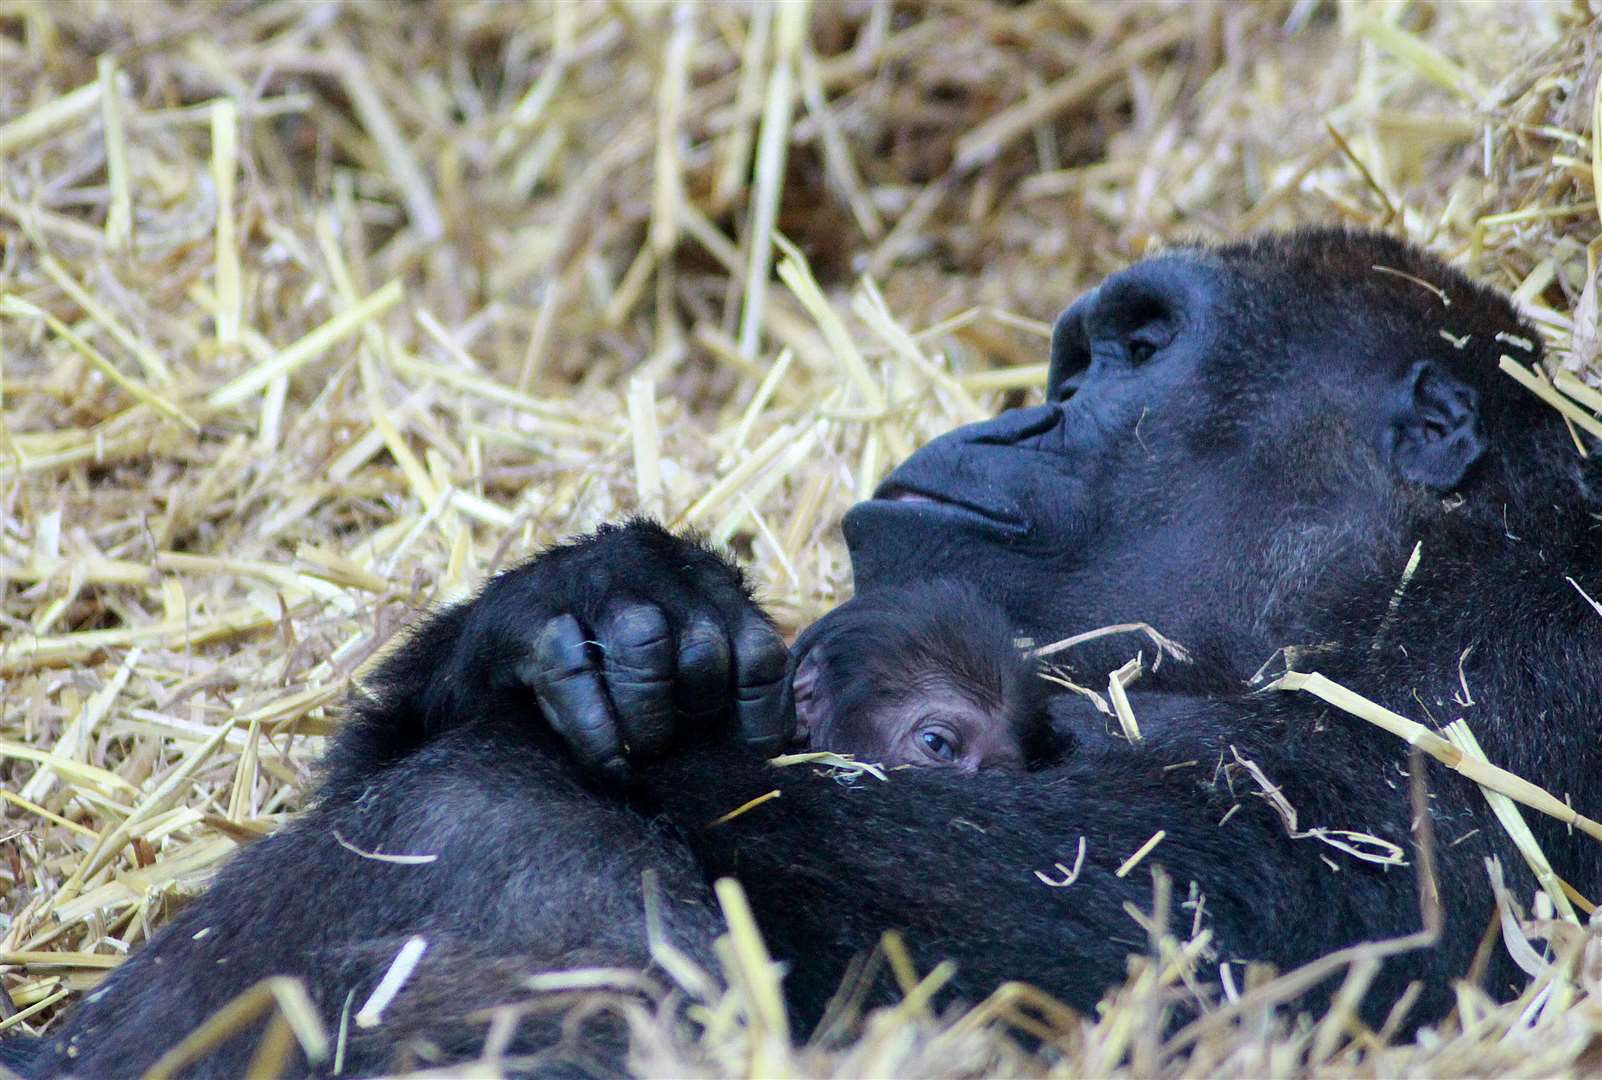 The parks are home to many animals, including this baby gorilla born at Port Lympne earlier this year. Photo: Leanne Smith